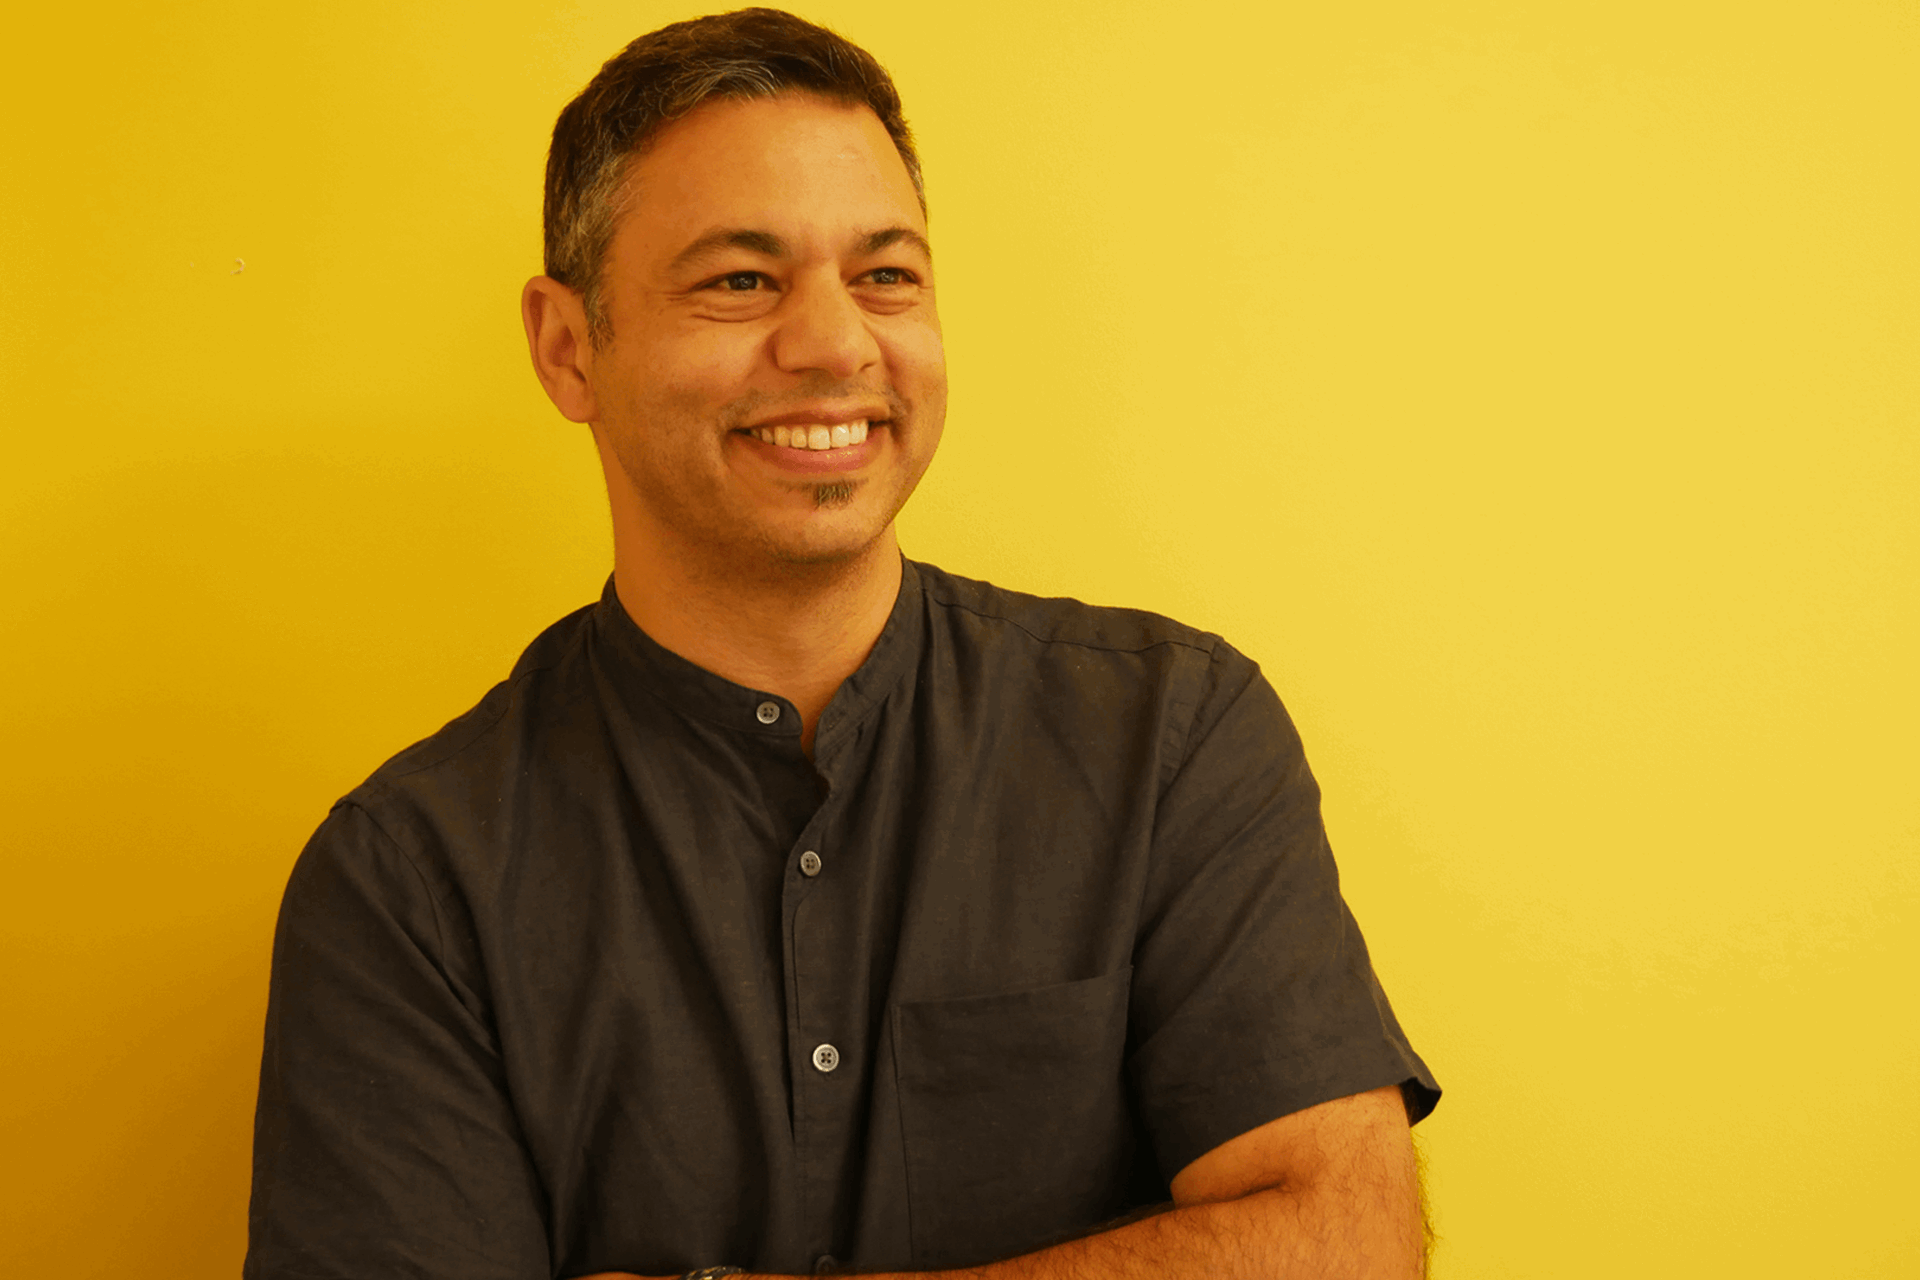 YoungMinds staff member Sacha Dingomal smiling against a yellow background